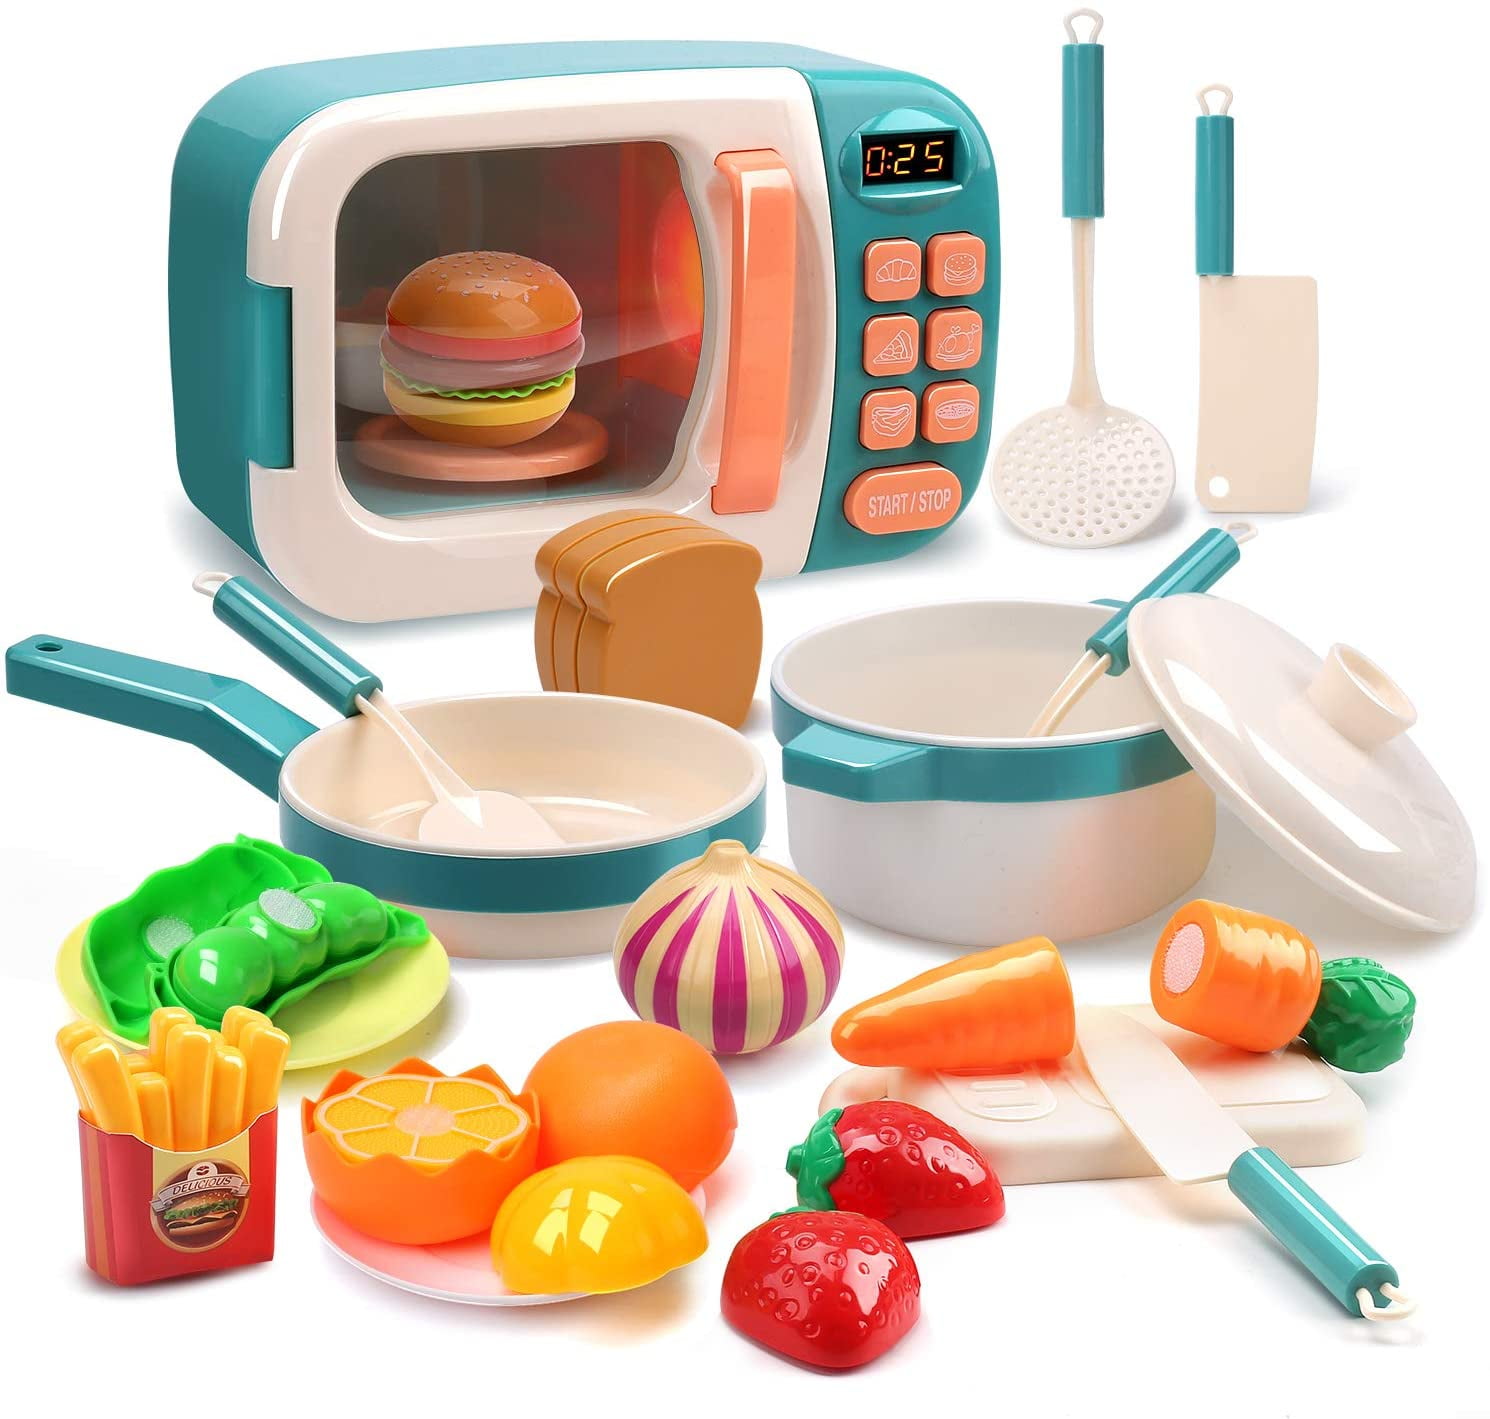 Toys Kitchen Play Set Kids Pretend Play Electronic Oven with Play Food